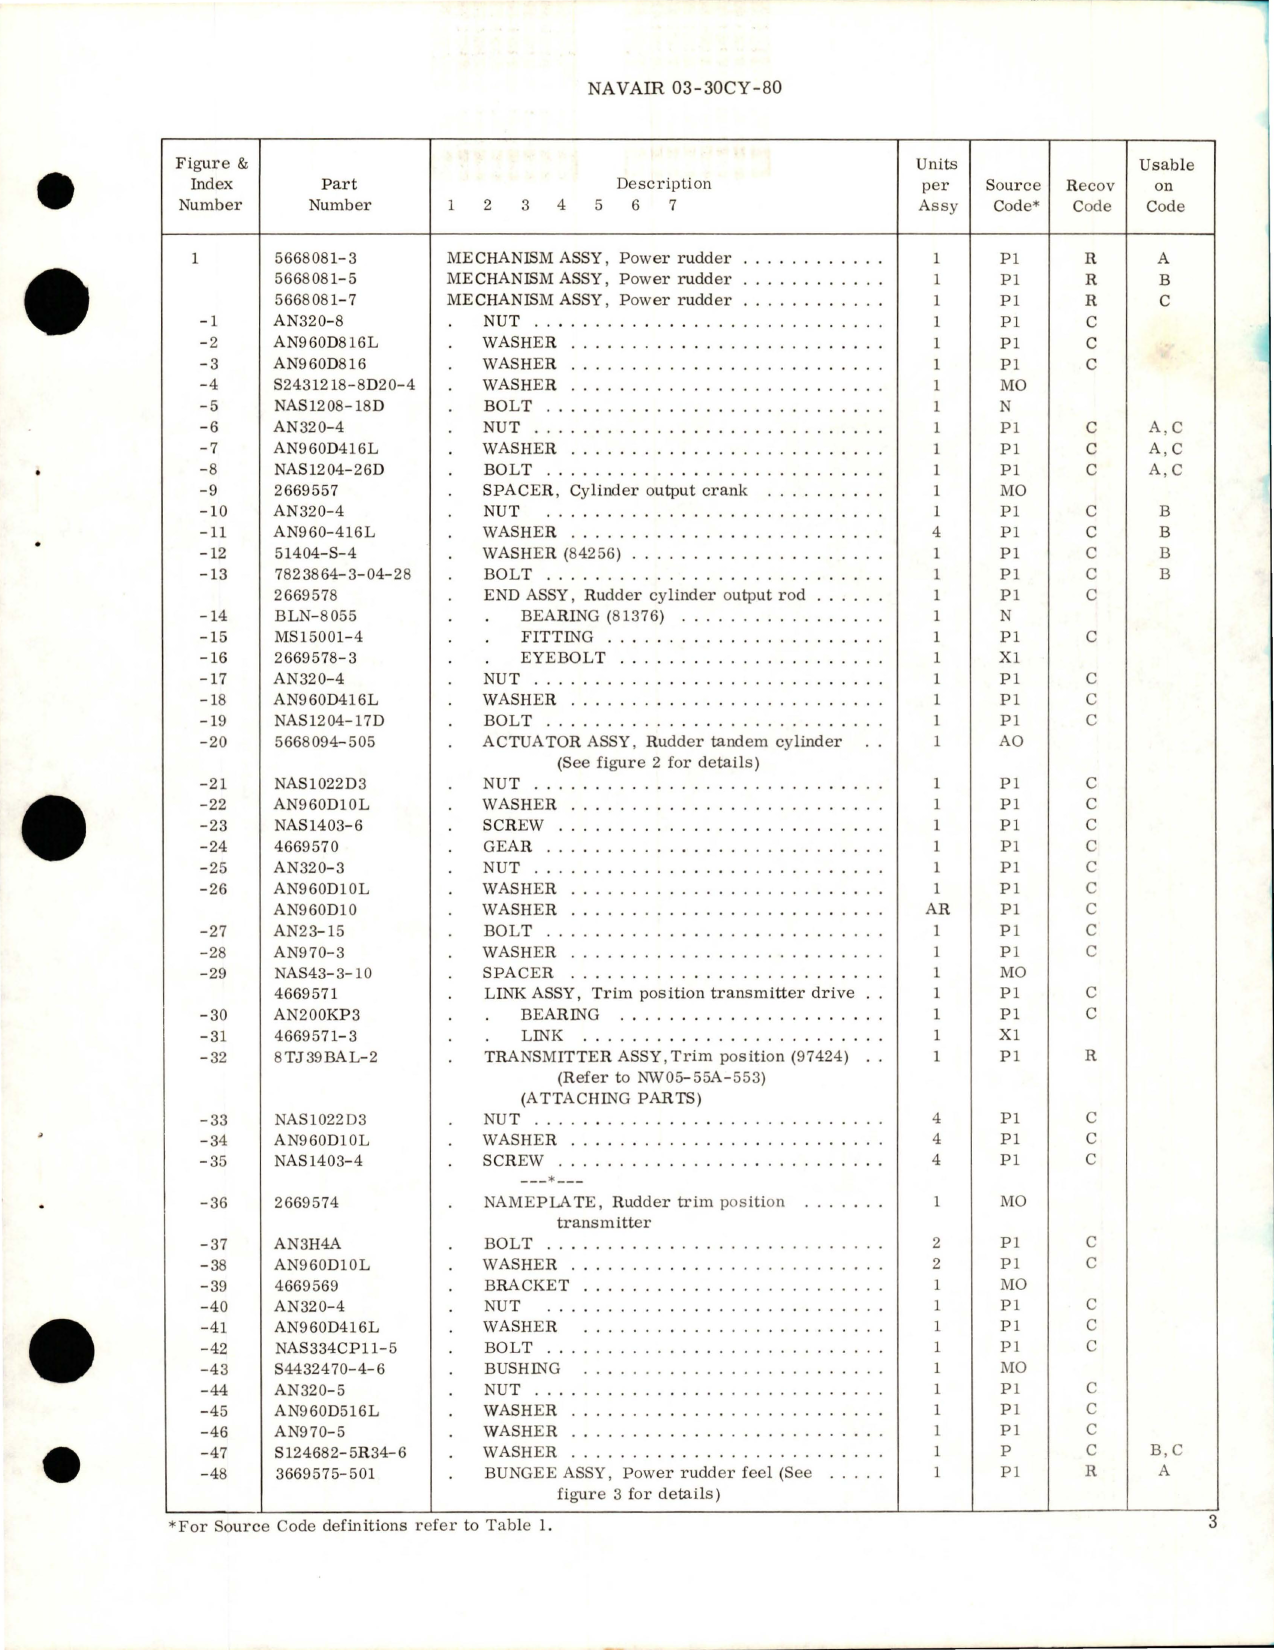 Sample page 5 from AirCorps Library document: Overhaul Instructions with Parts for Mechanism Assembly Power Rudder - Parts 5668081-3, 5668081-5, and 5668081-7